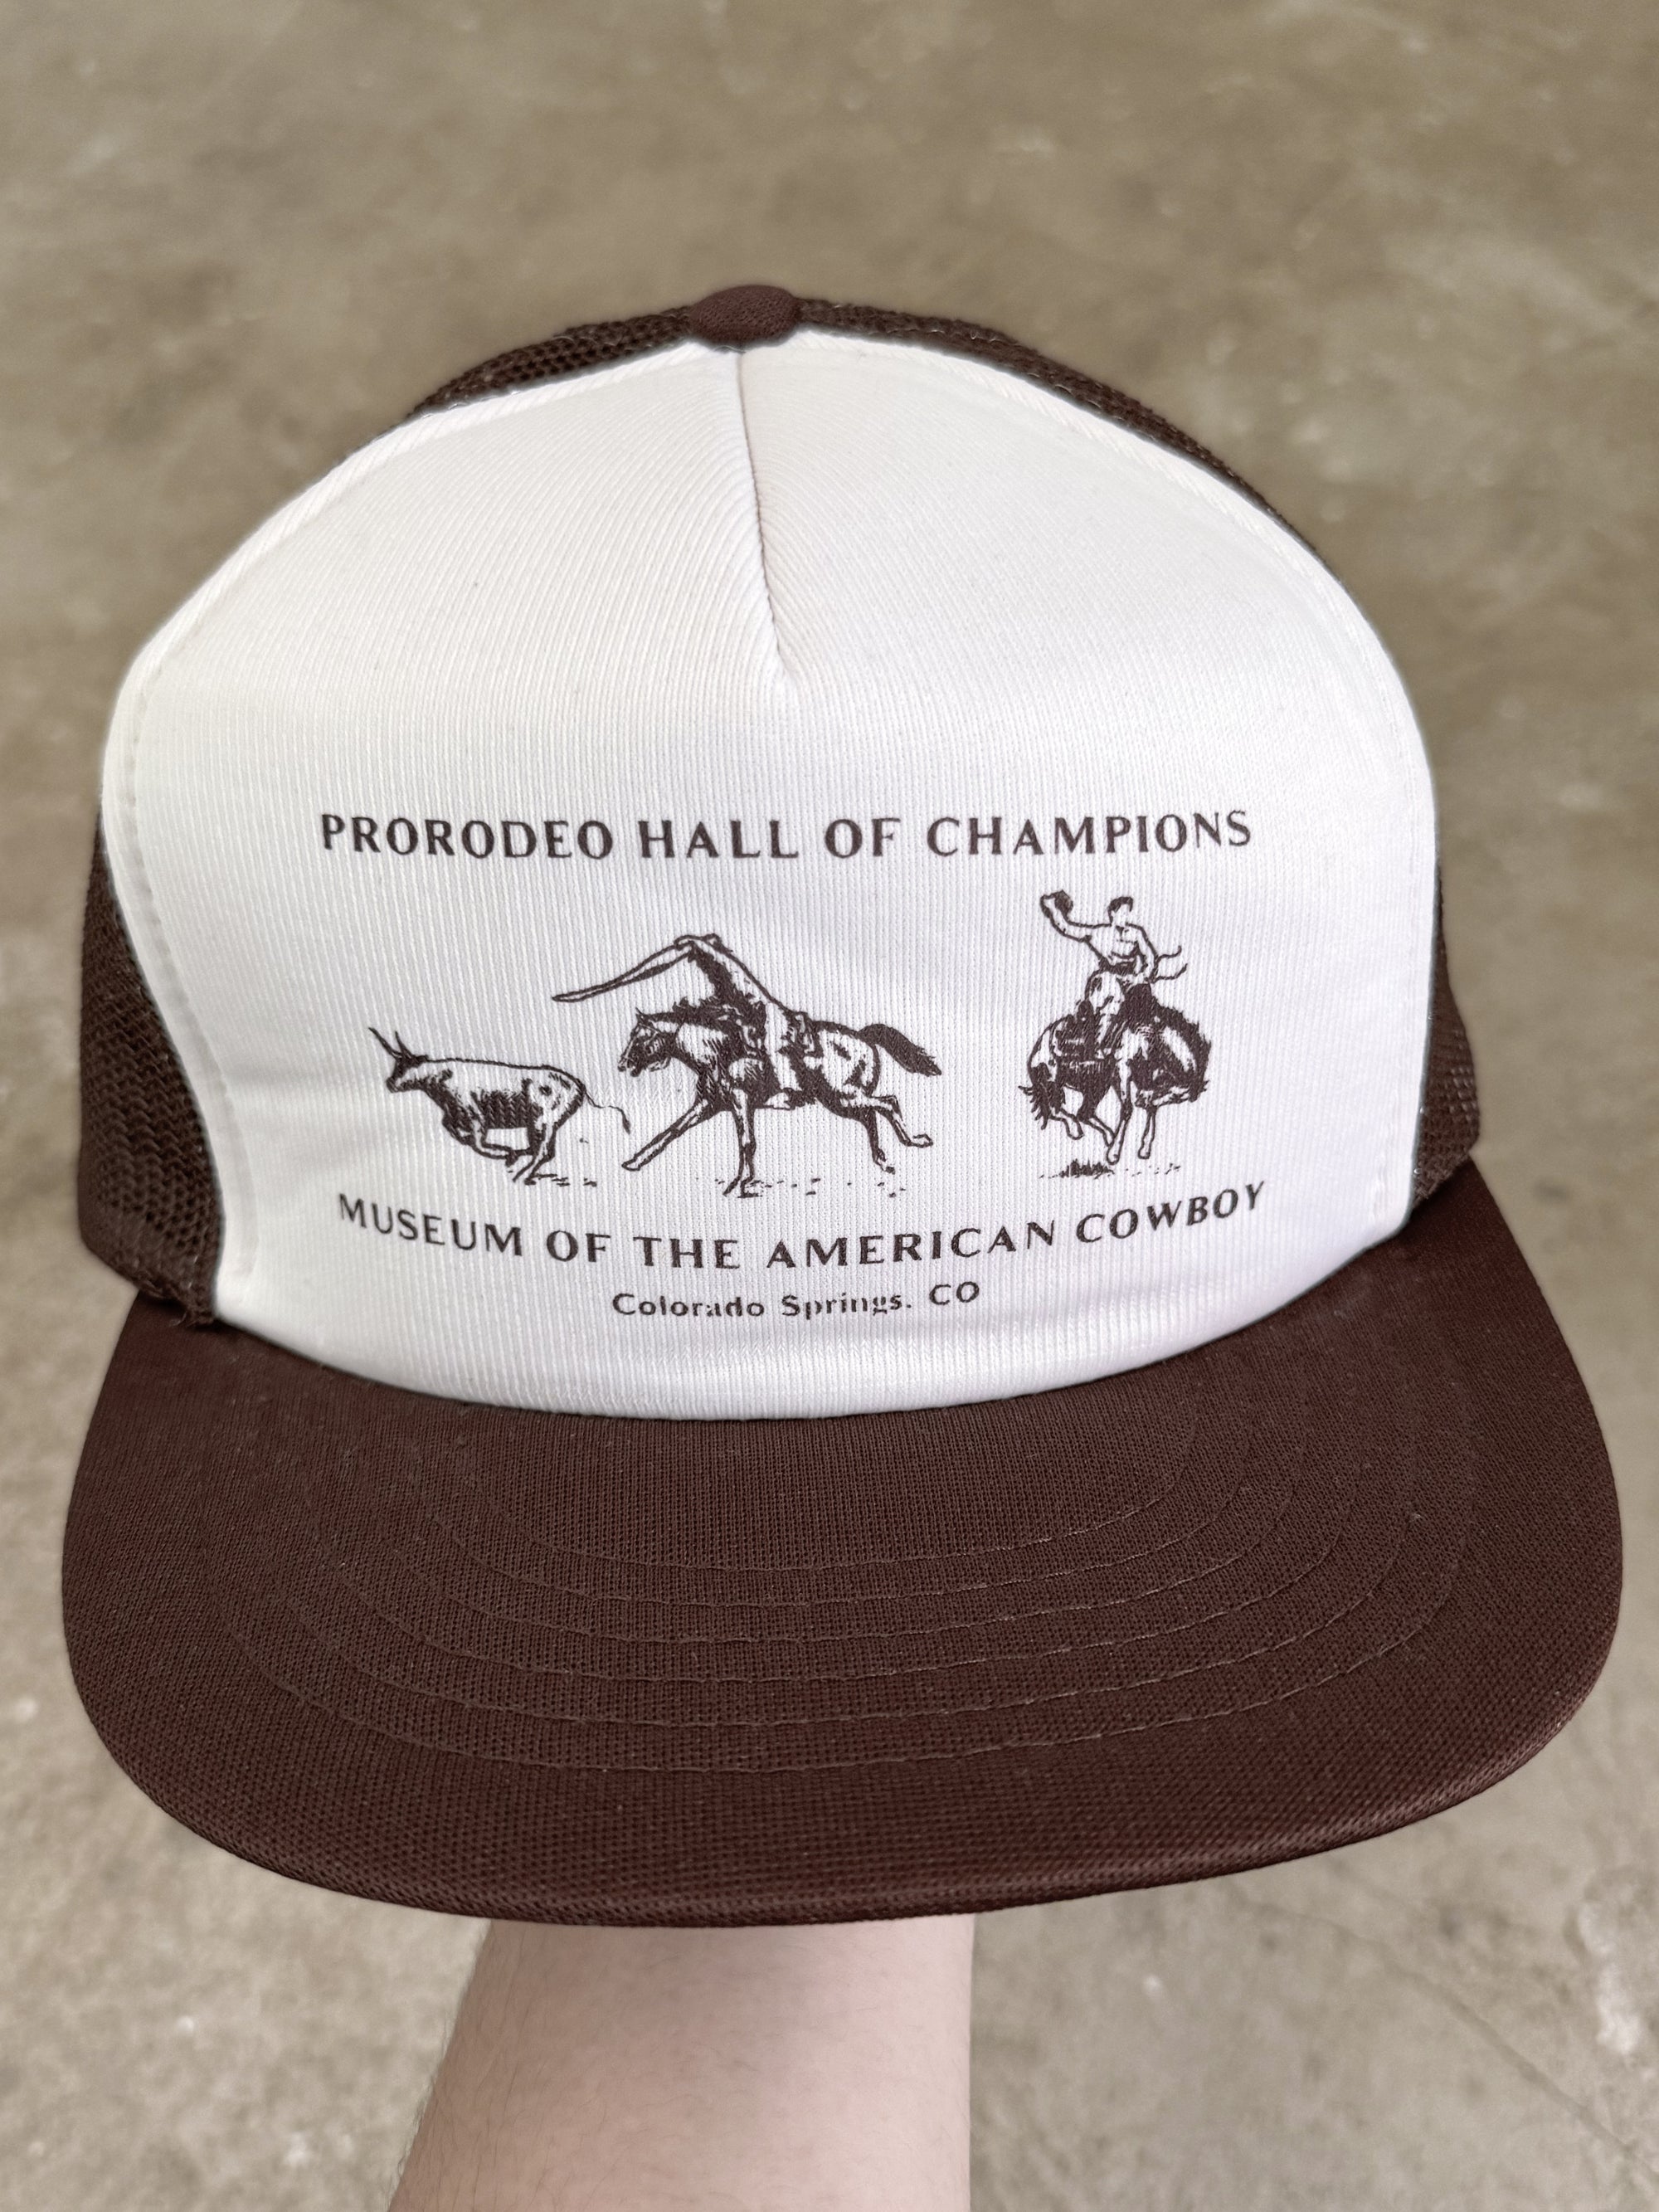 1980s "Pro Rodeo Hall of Champions" Trucker Hat